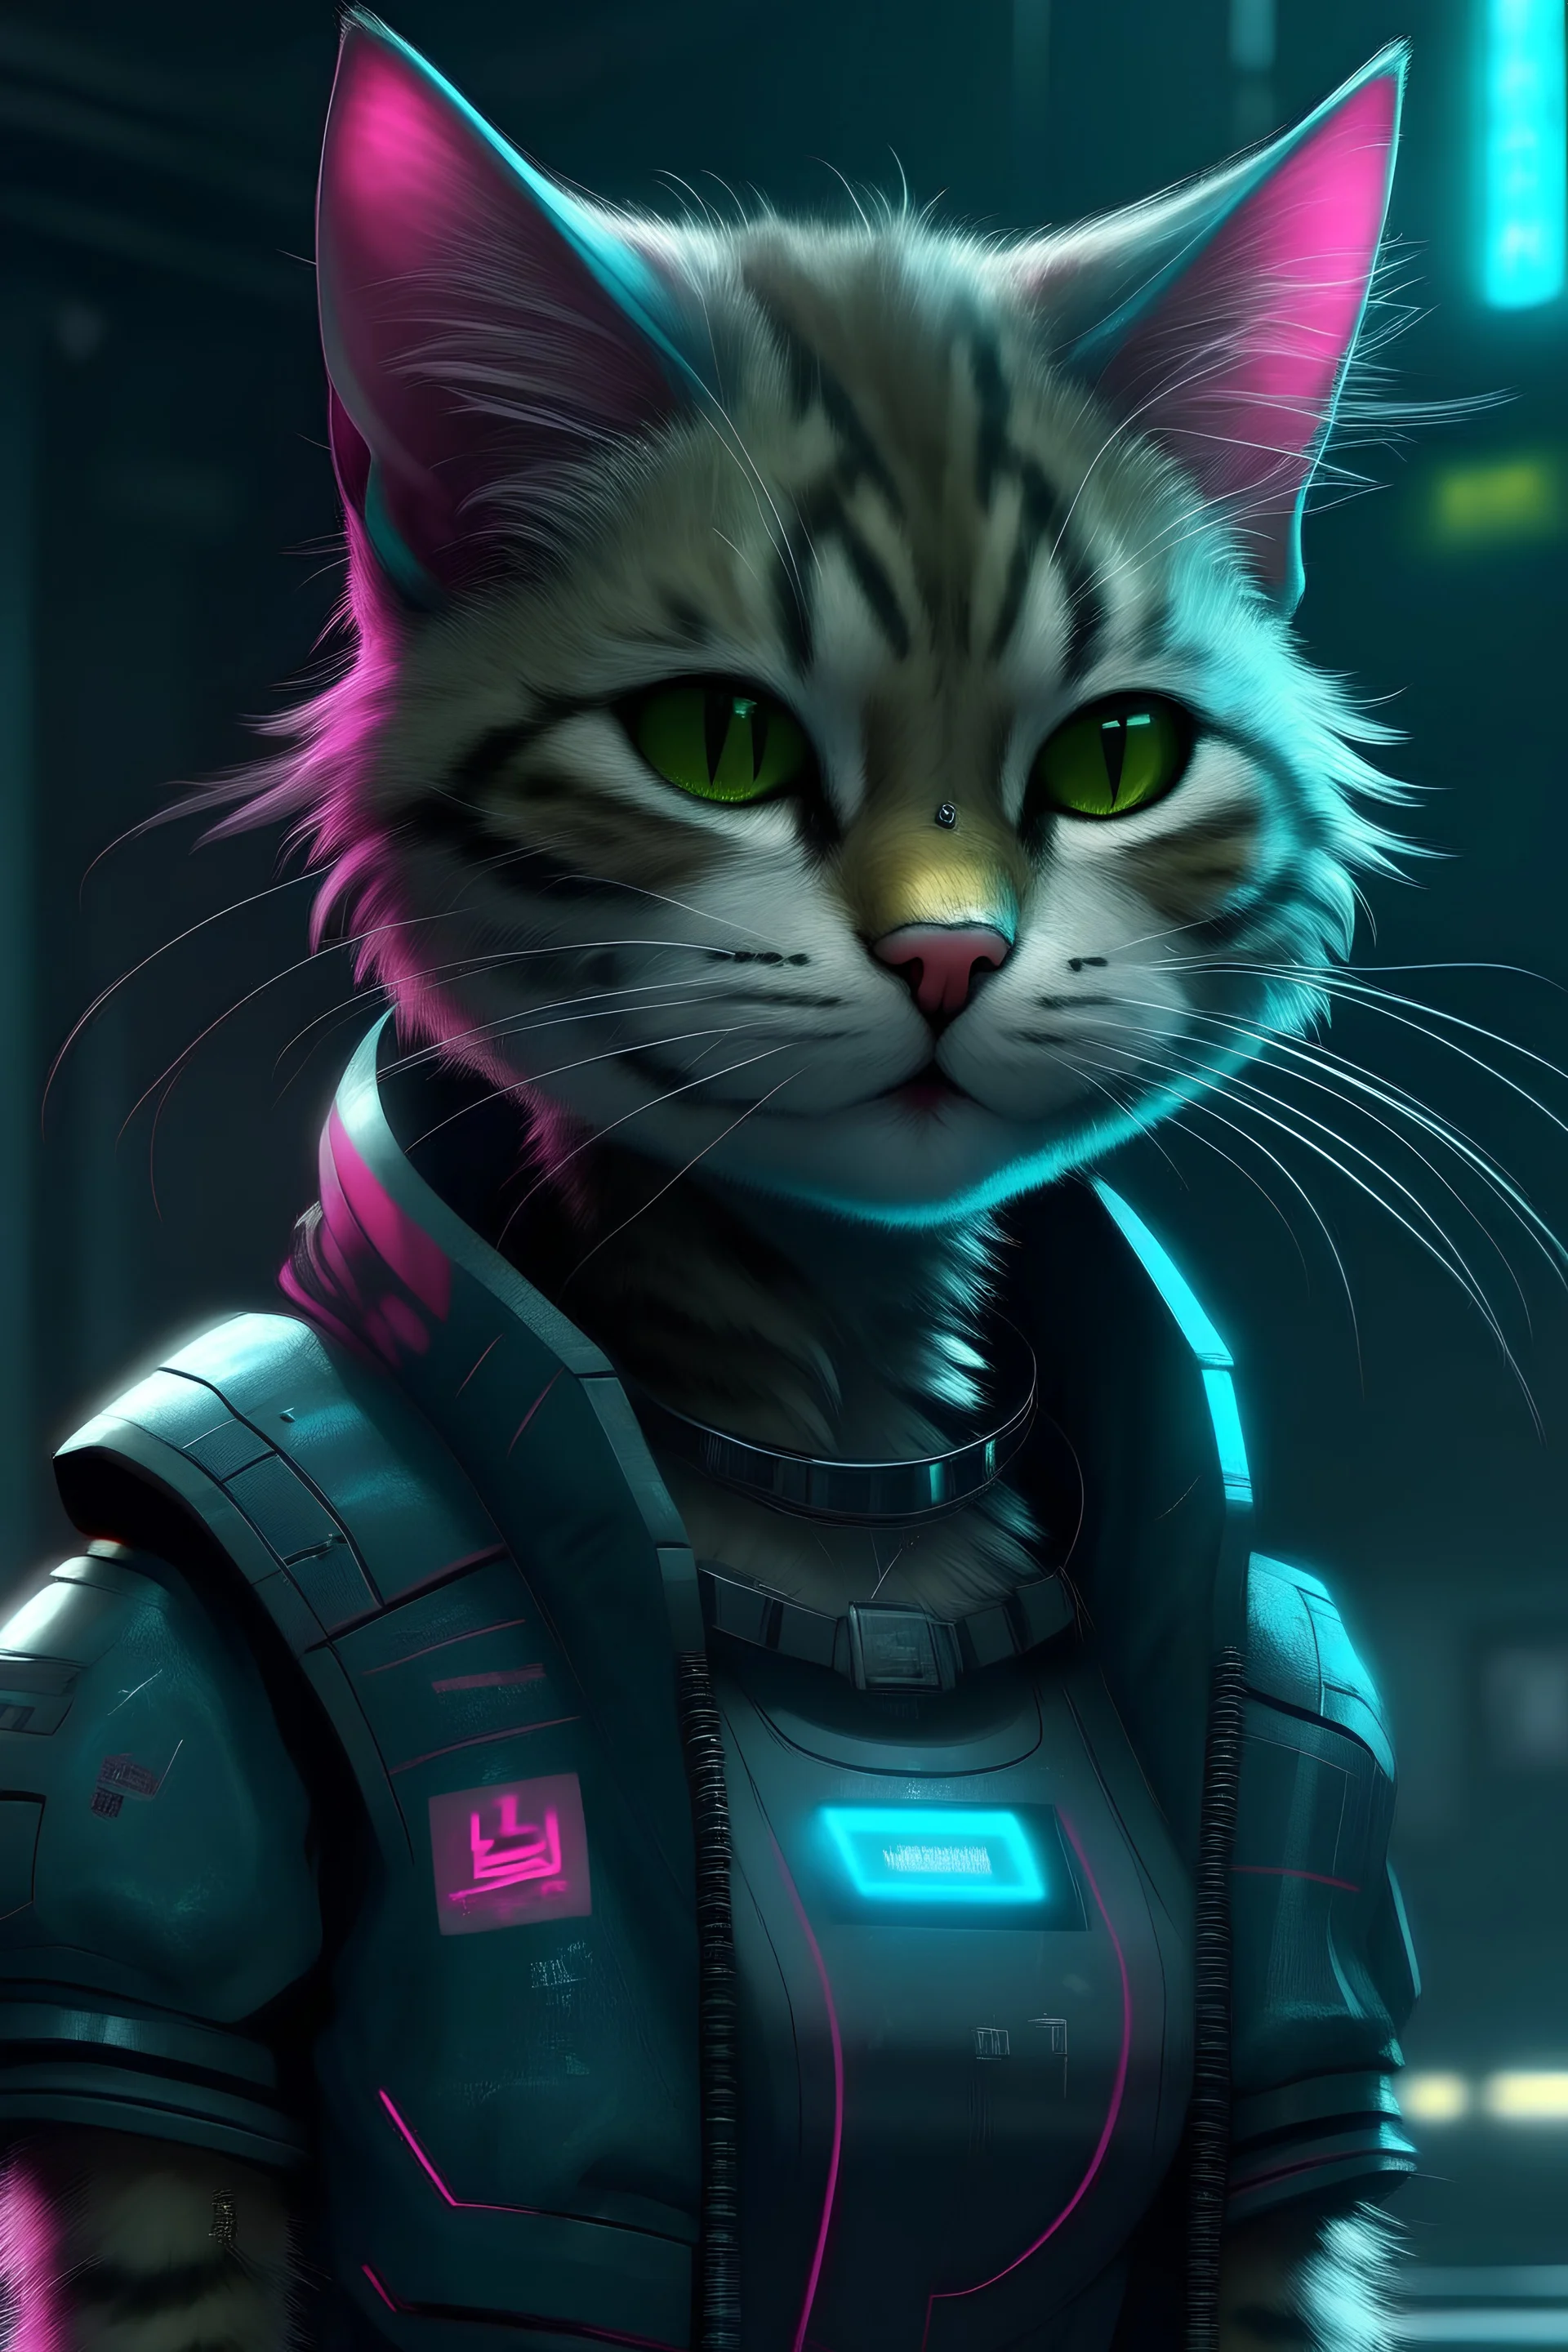 lucy from cyberpunk as a cat